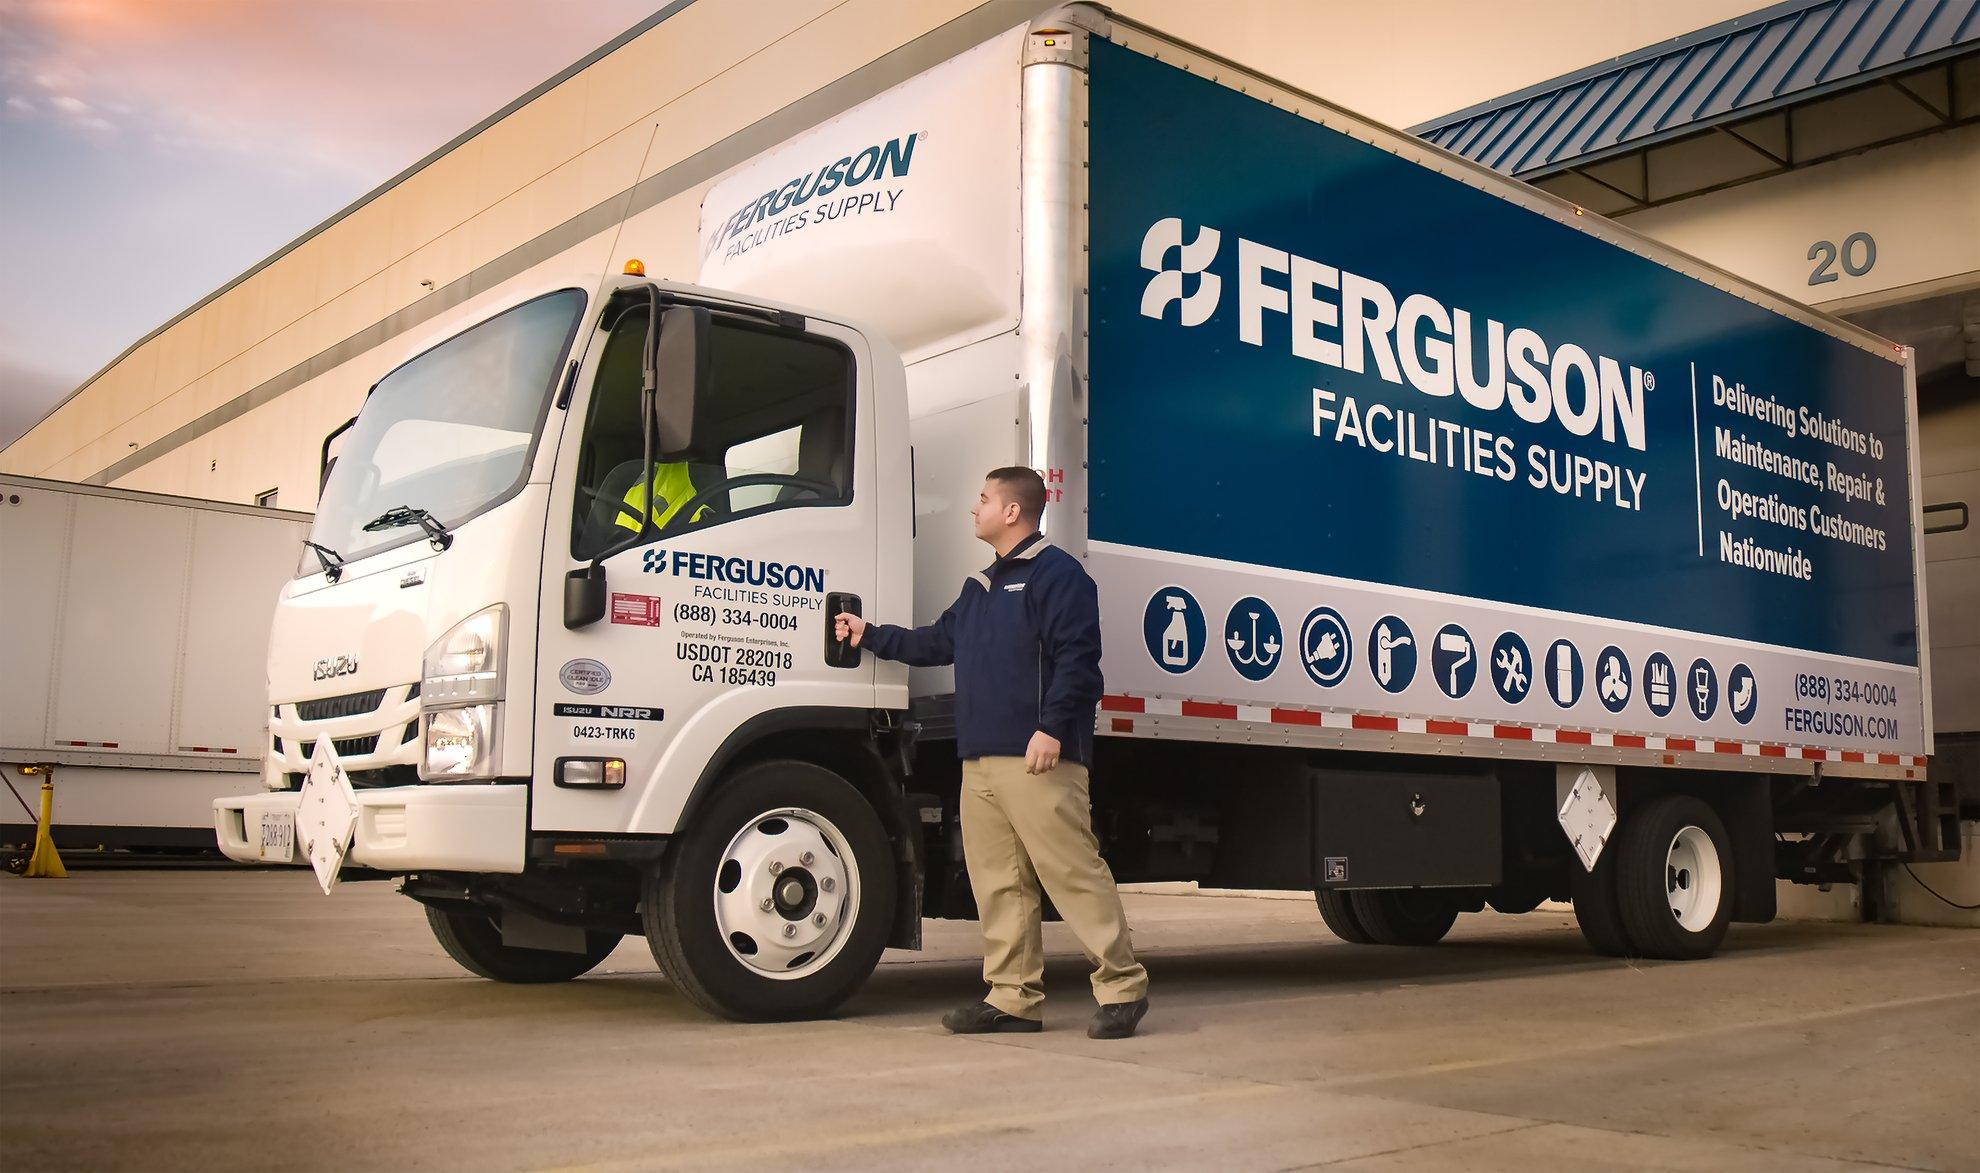 An associate opens the door to his Ferguson Facilities Supply delivery truck.